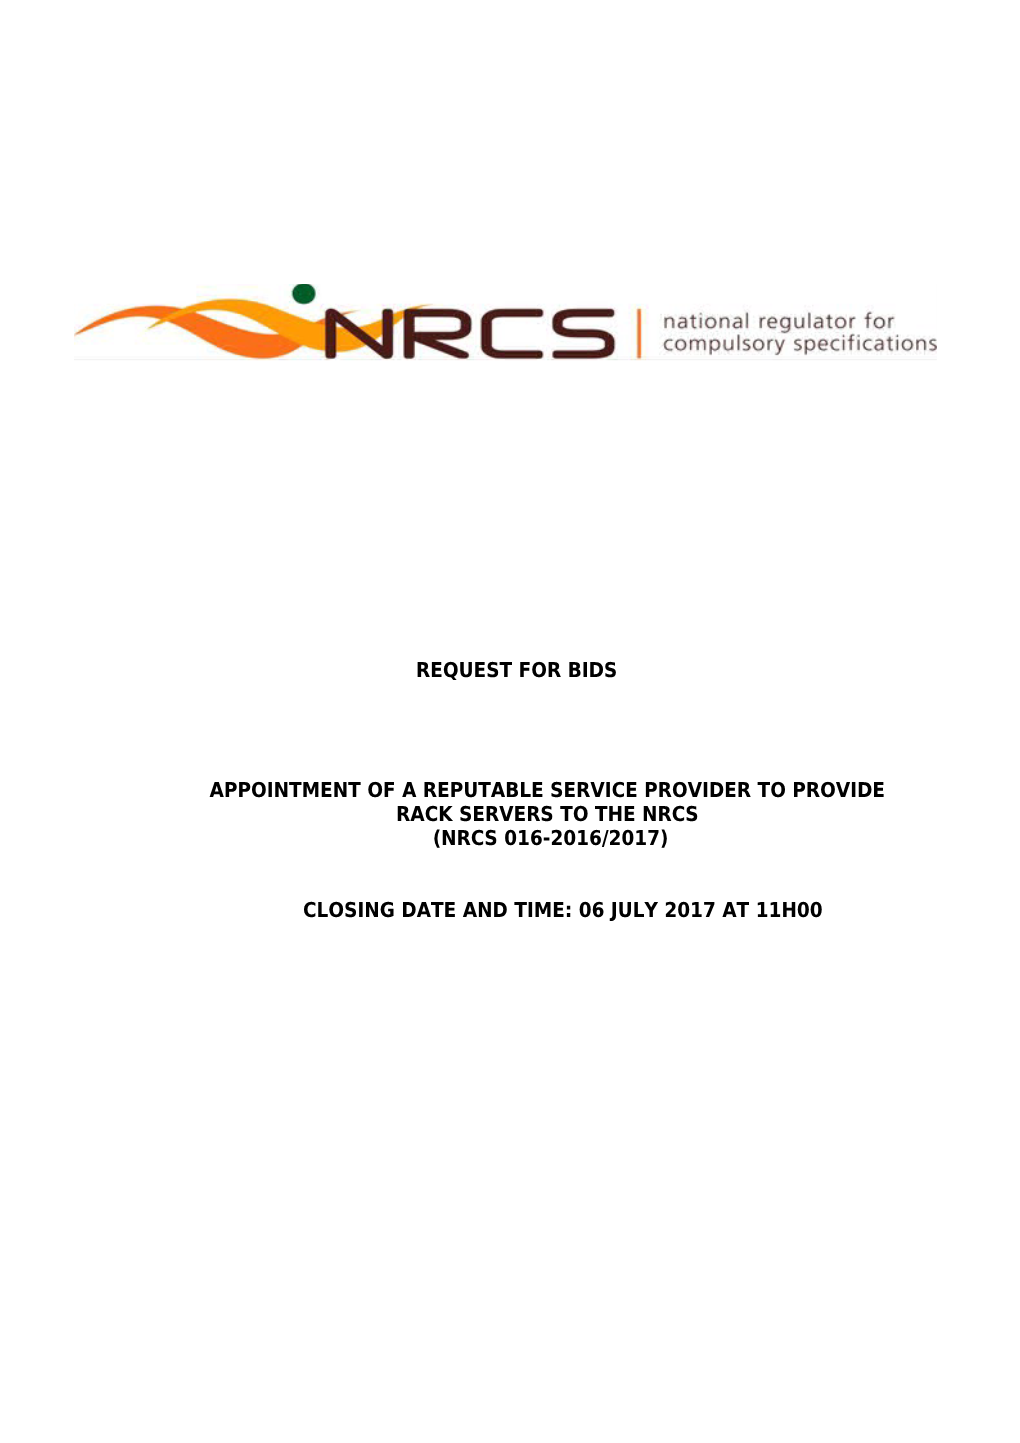 Appointment of a Reputable Service Provider to Provide Rack Servers to the Nrcs